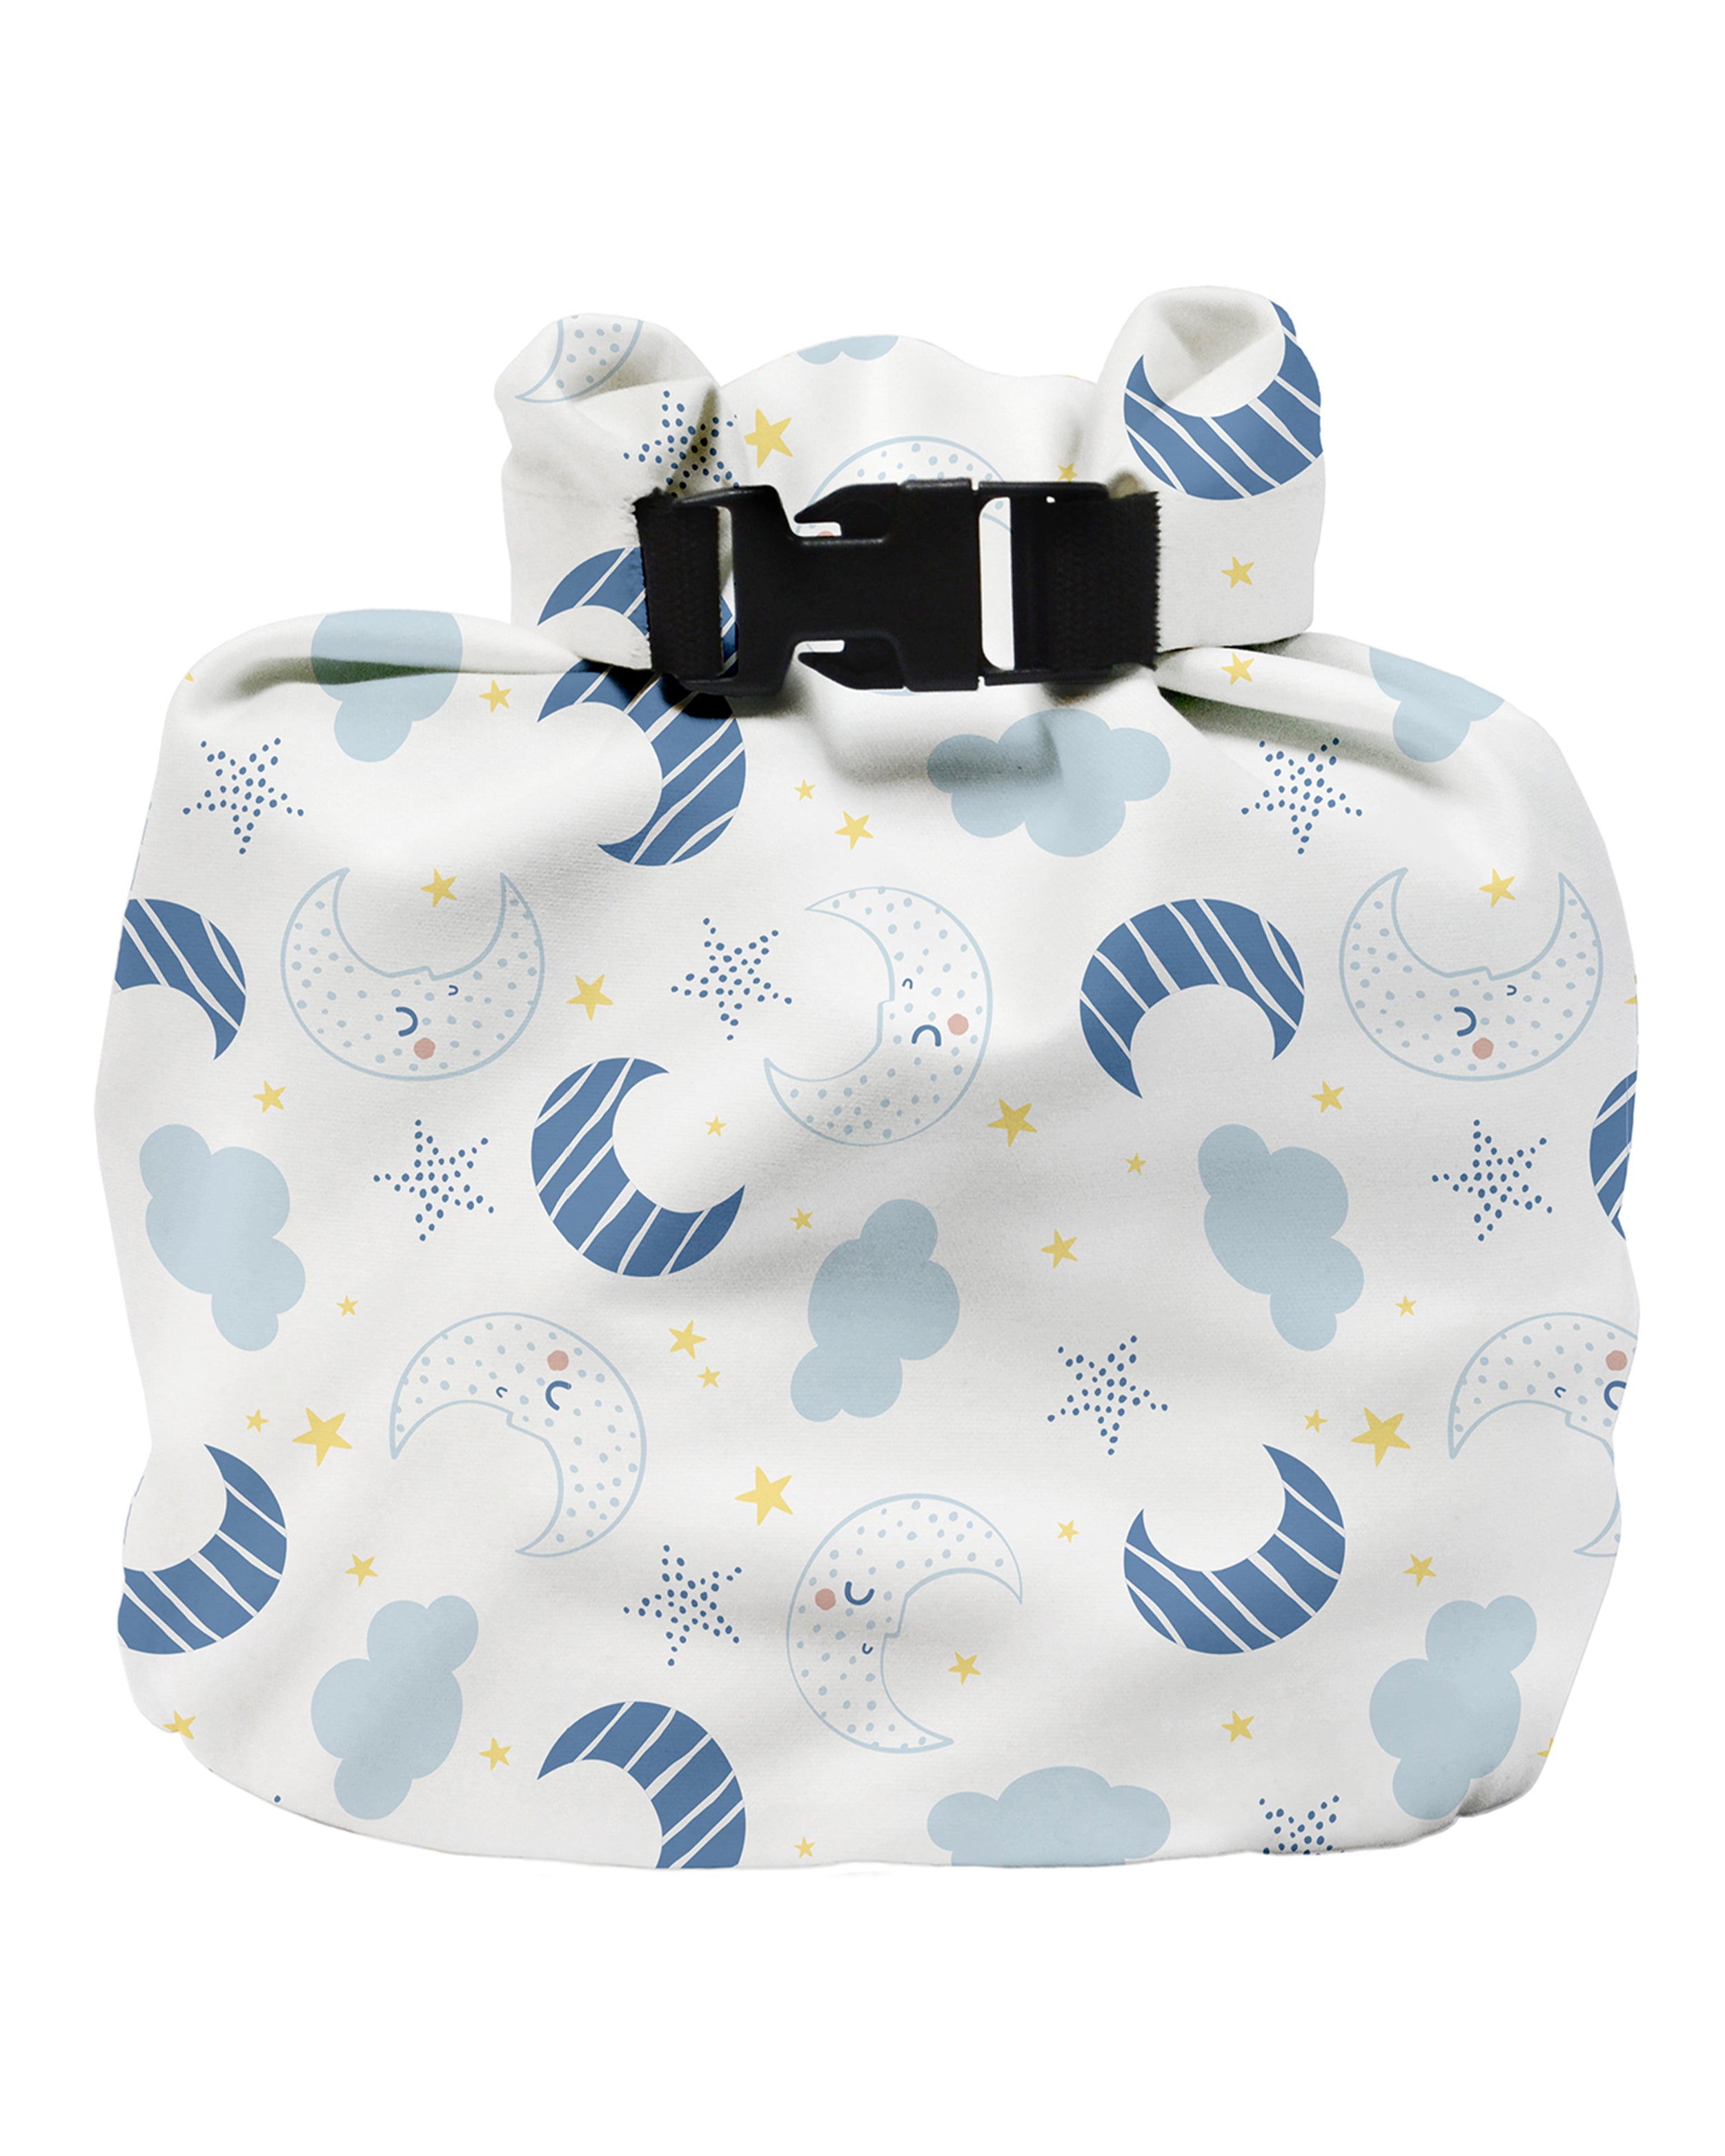 Old Reusable Nappies: Innovative Ways to Repurpose Old Reusable Nappie –  Bambino Mio (UK & IE)